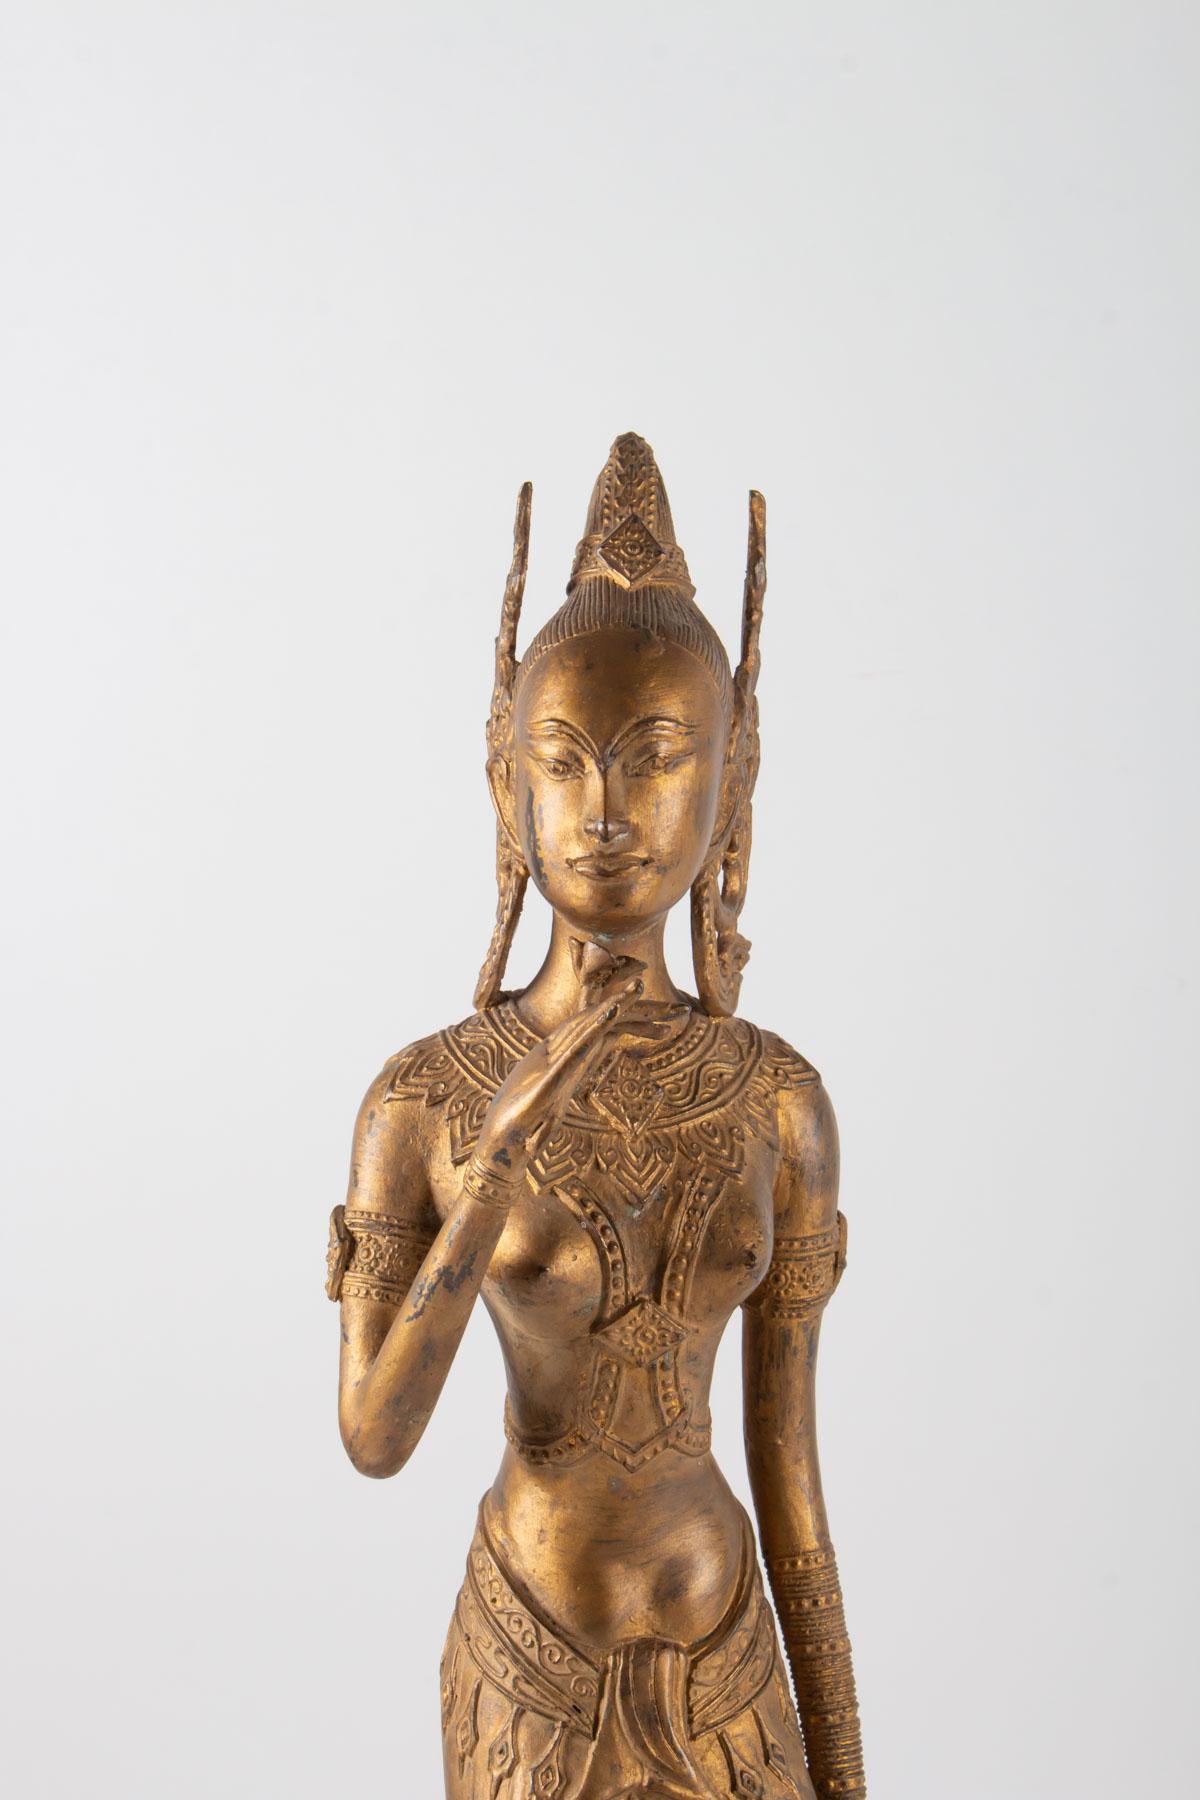 Indonesian goddess in gilded metal holding a lotus flower, 1920-1940.
Measures: H 61cm, W 15cm, W 15cm.